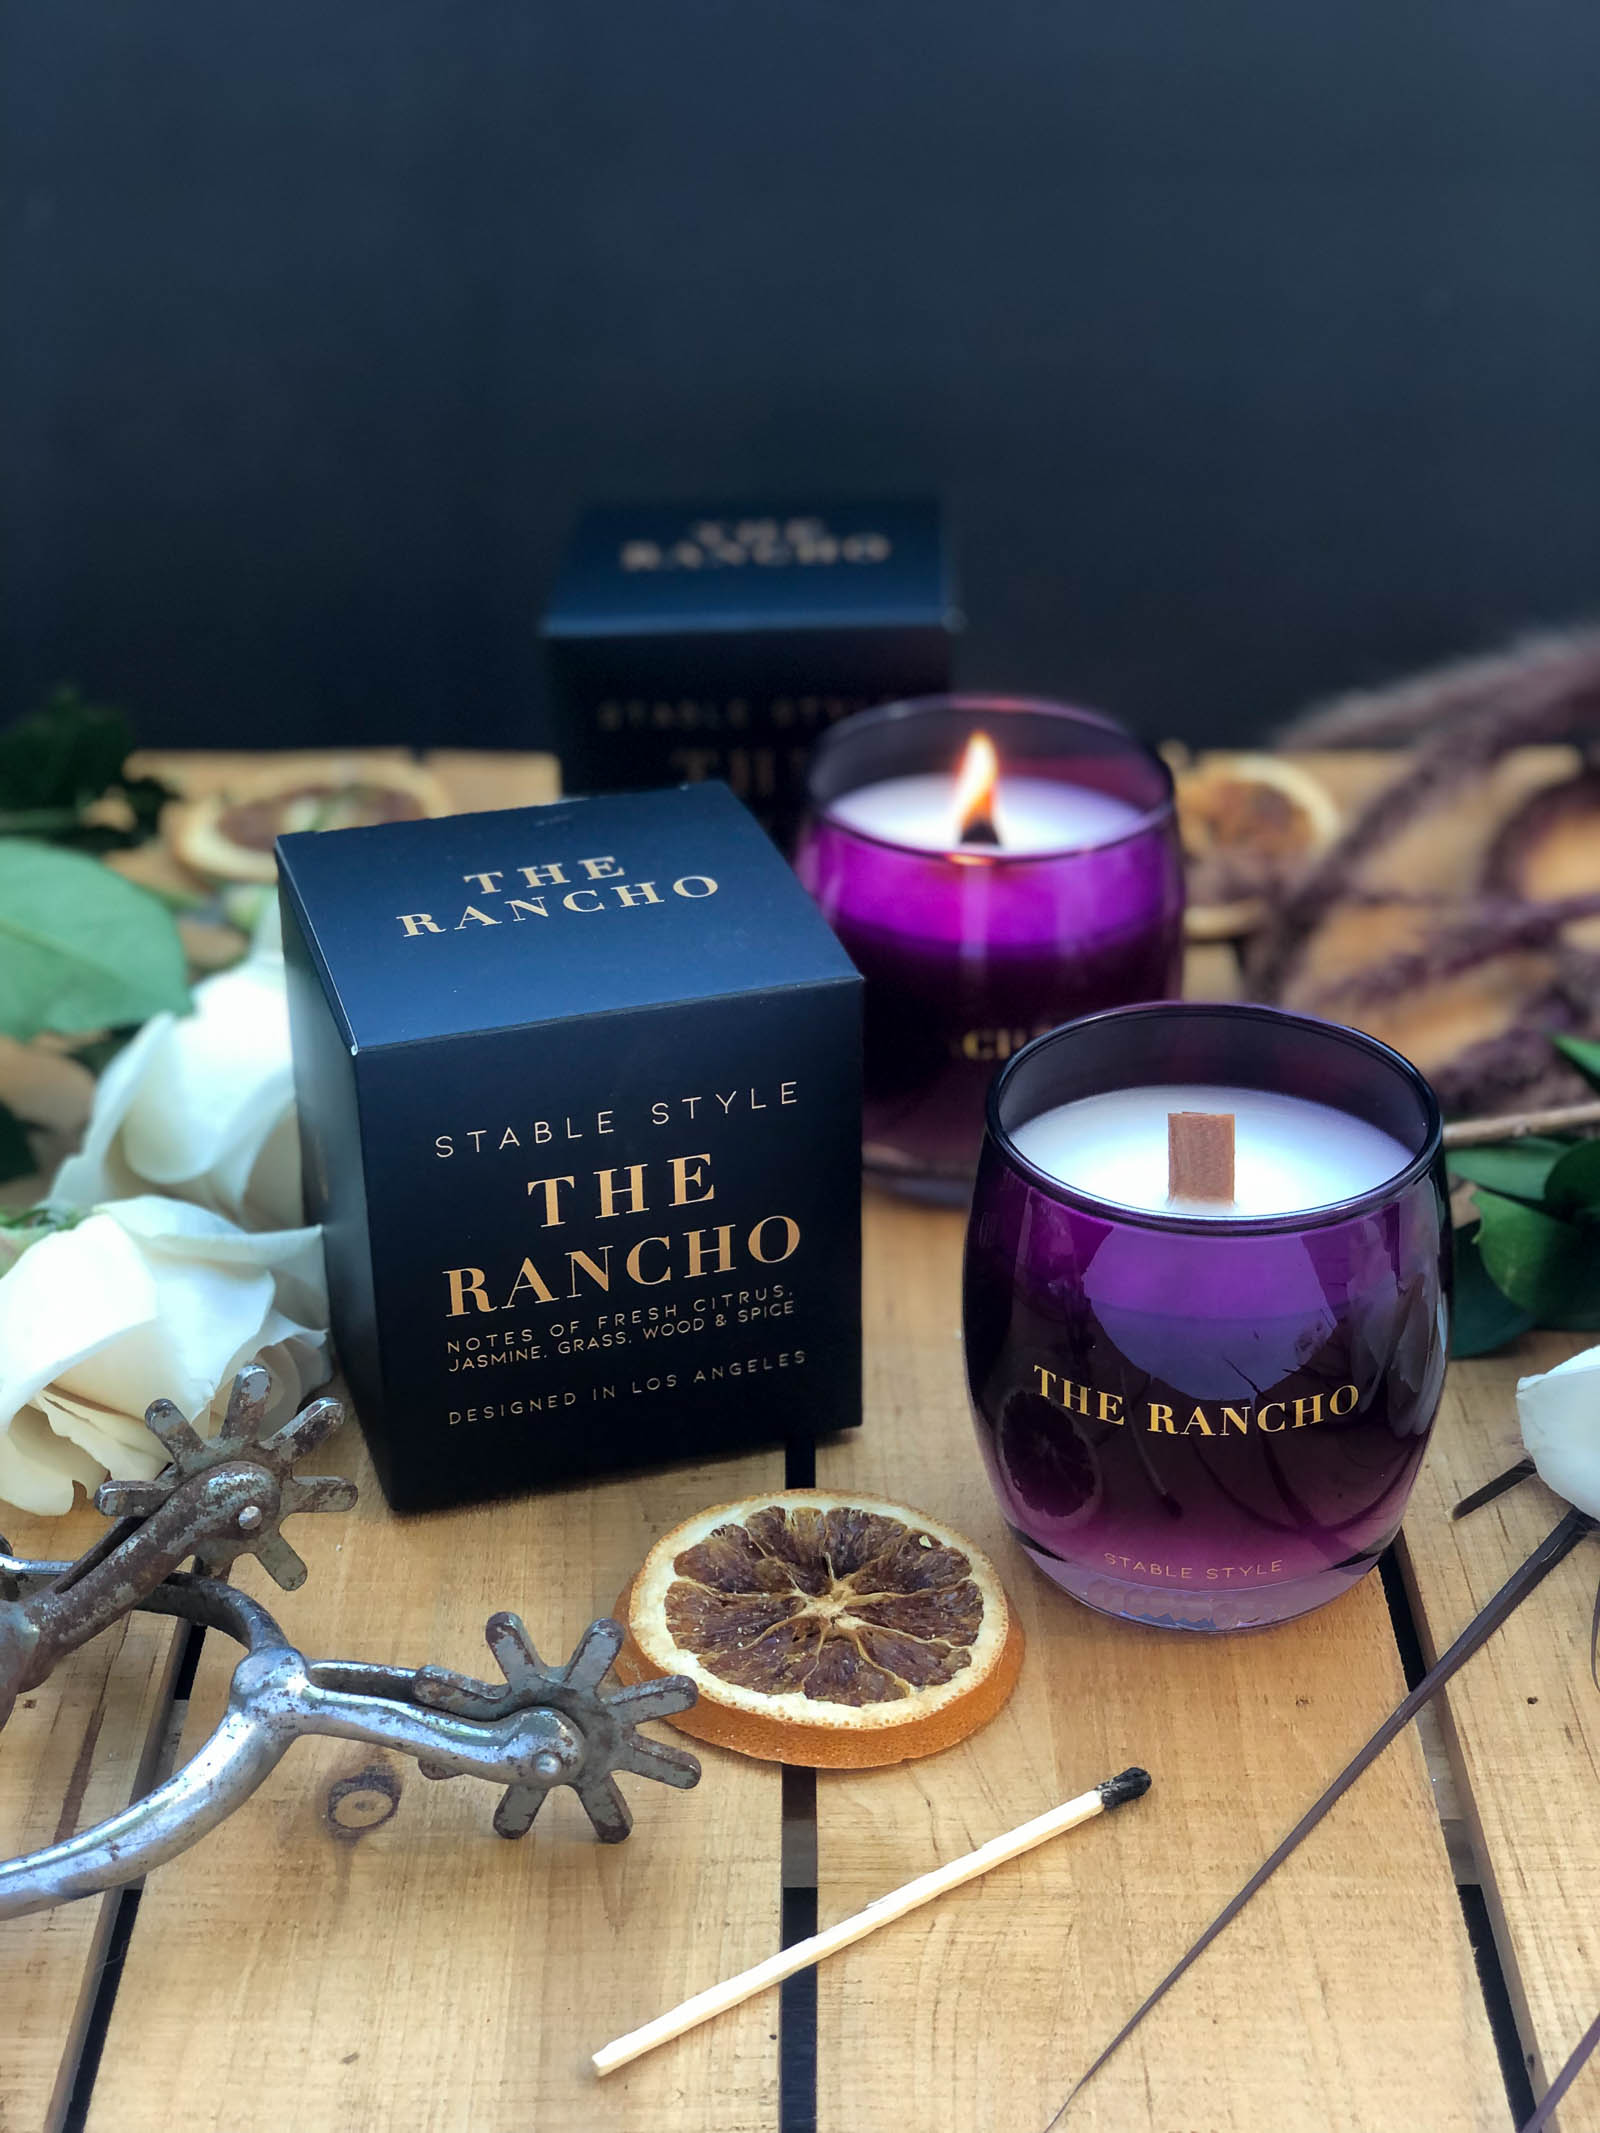 Luxury candles by Stable Style